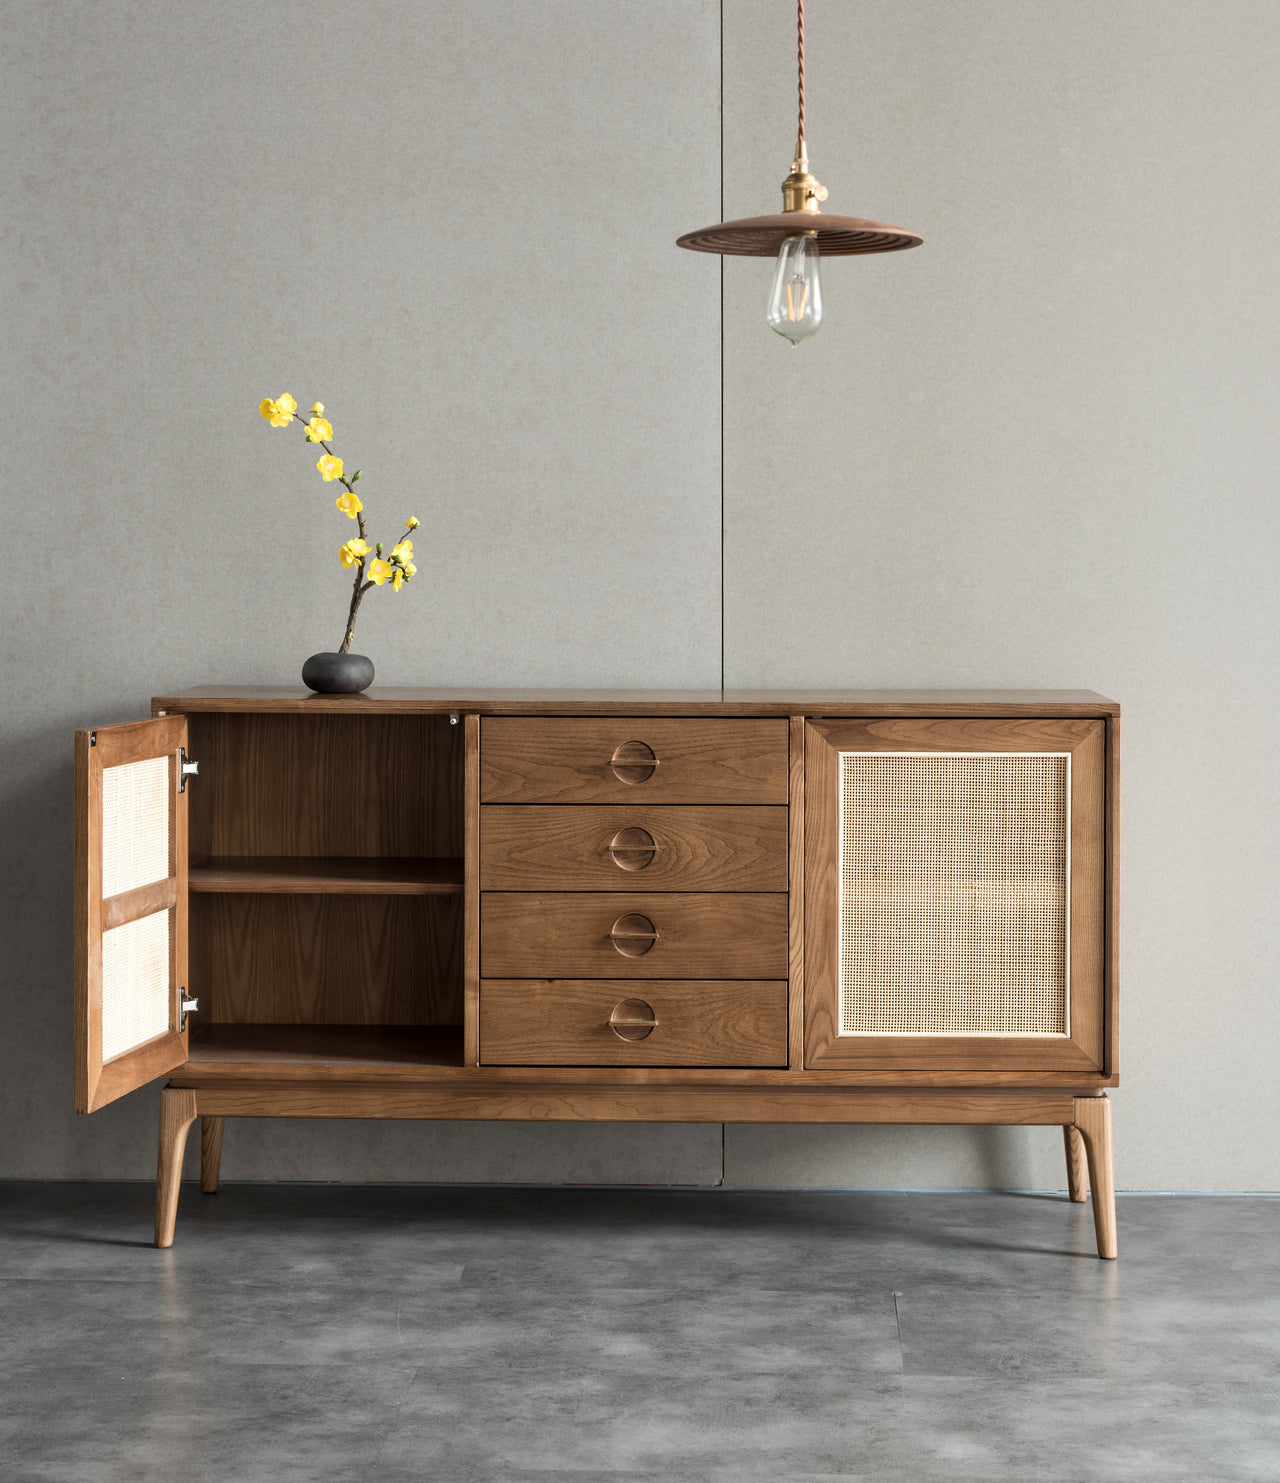 Solid Wood Storage Cabinet | Cottage Sideboard Buffet with Rattan Doors and 4 Drawers